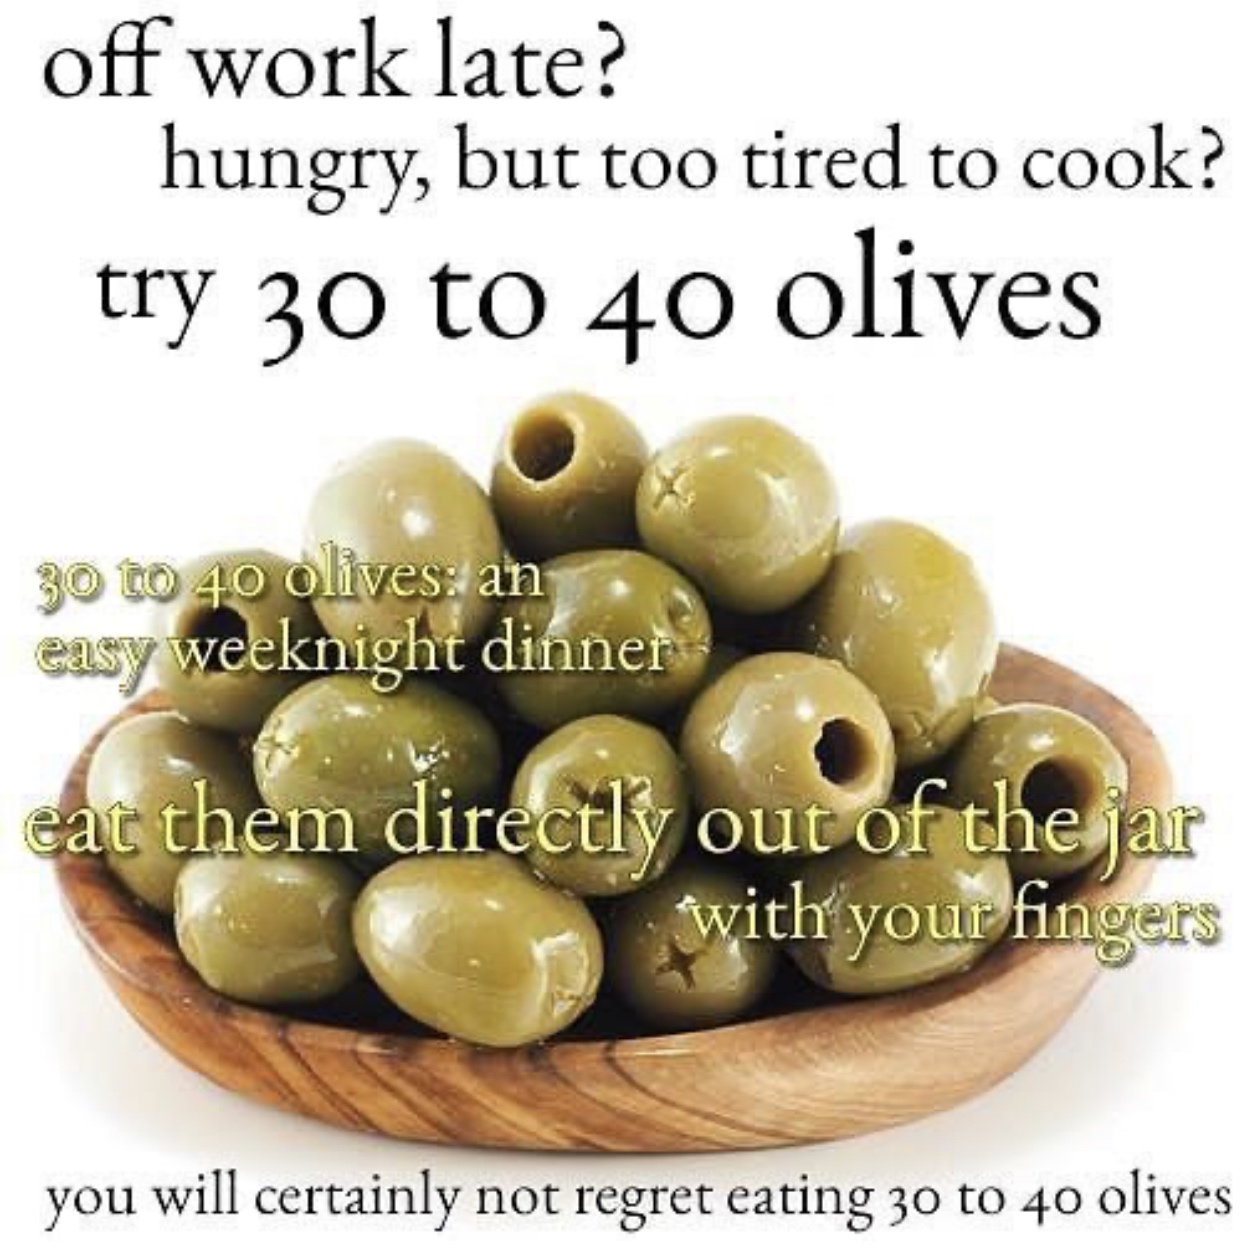 olive meme - off work late? hungry, but too tired to cook? try 30 to 40 olives 30 to 40 olives an easy weeknight dinner eat them directly out of the jar with your fingers you will certainly not regret eating 30 to 40 olives